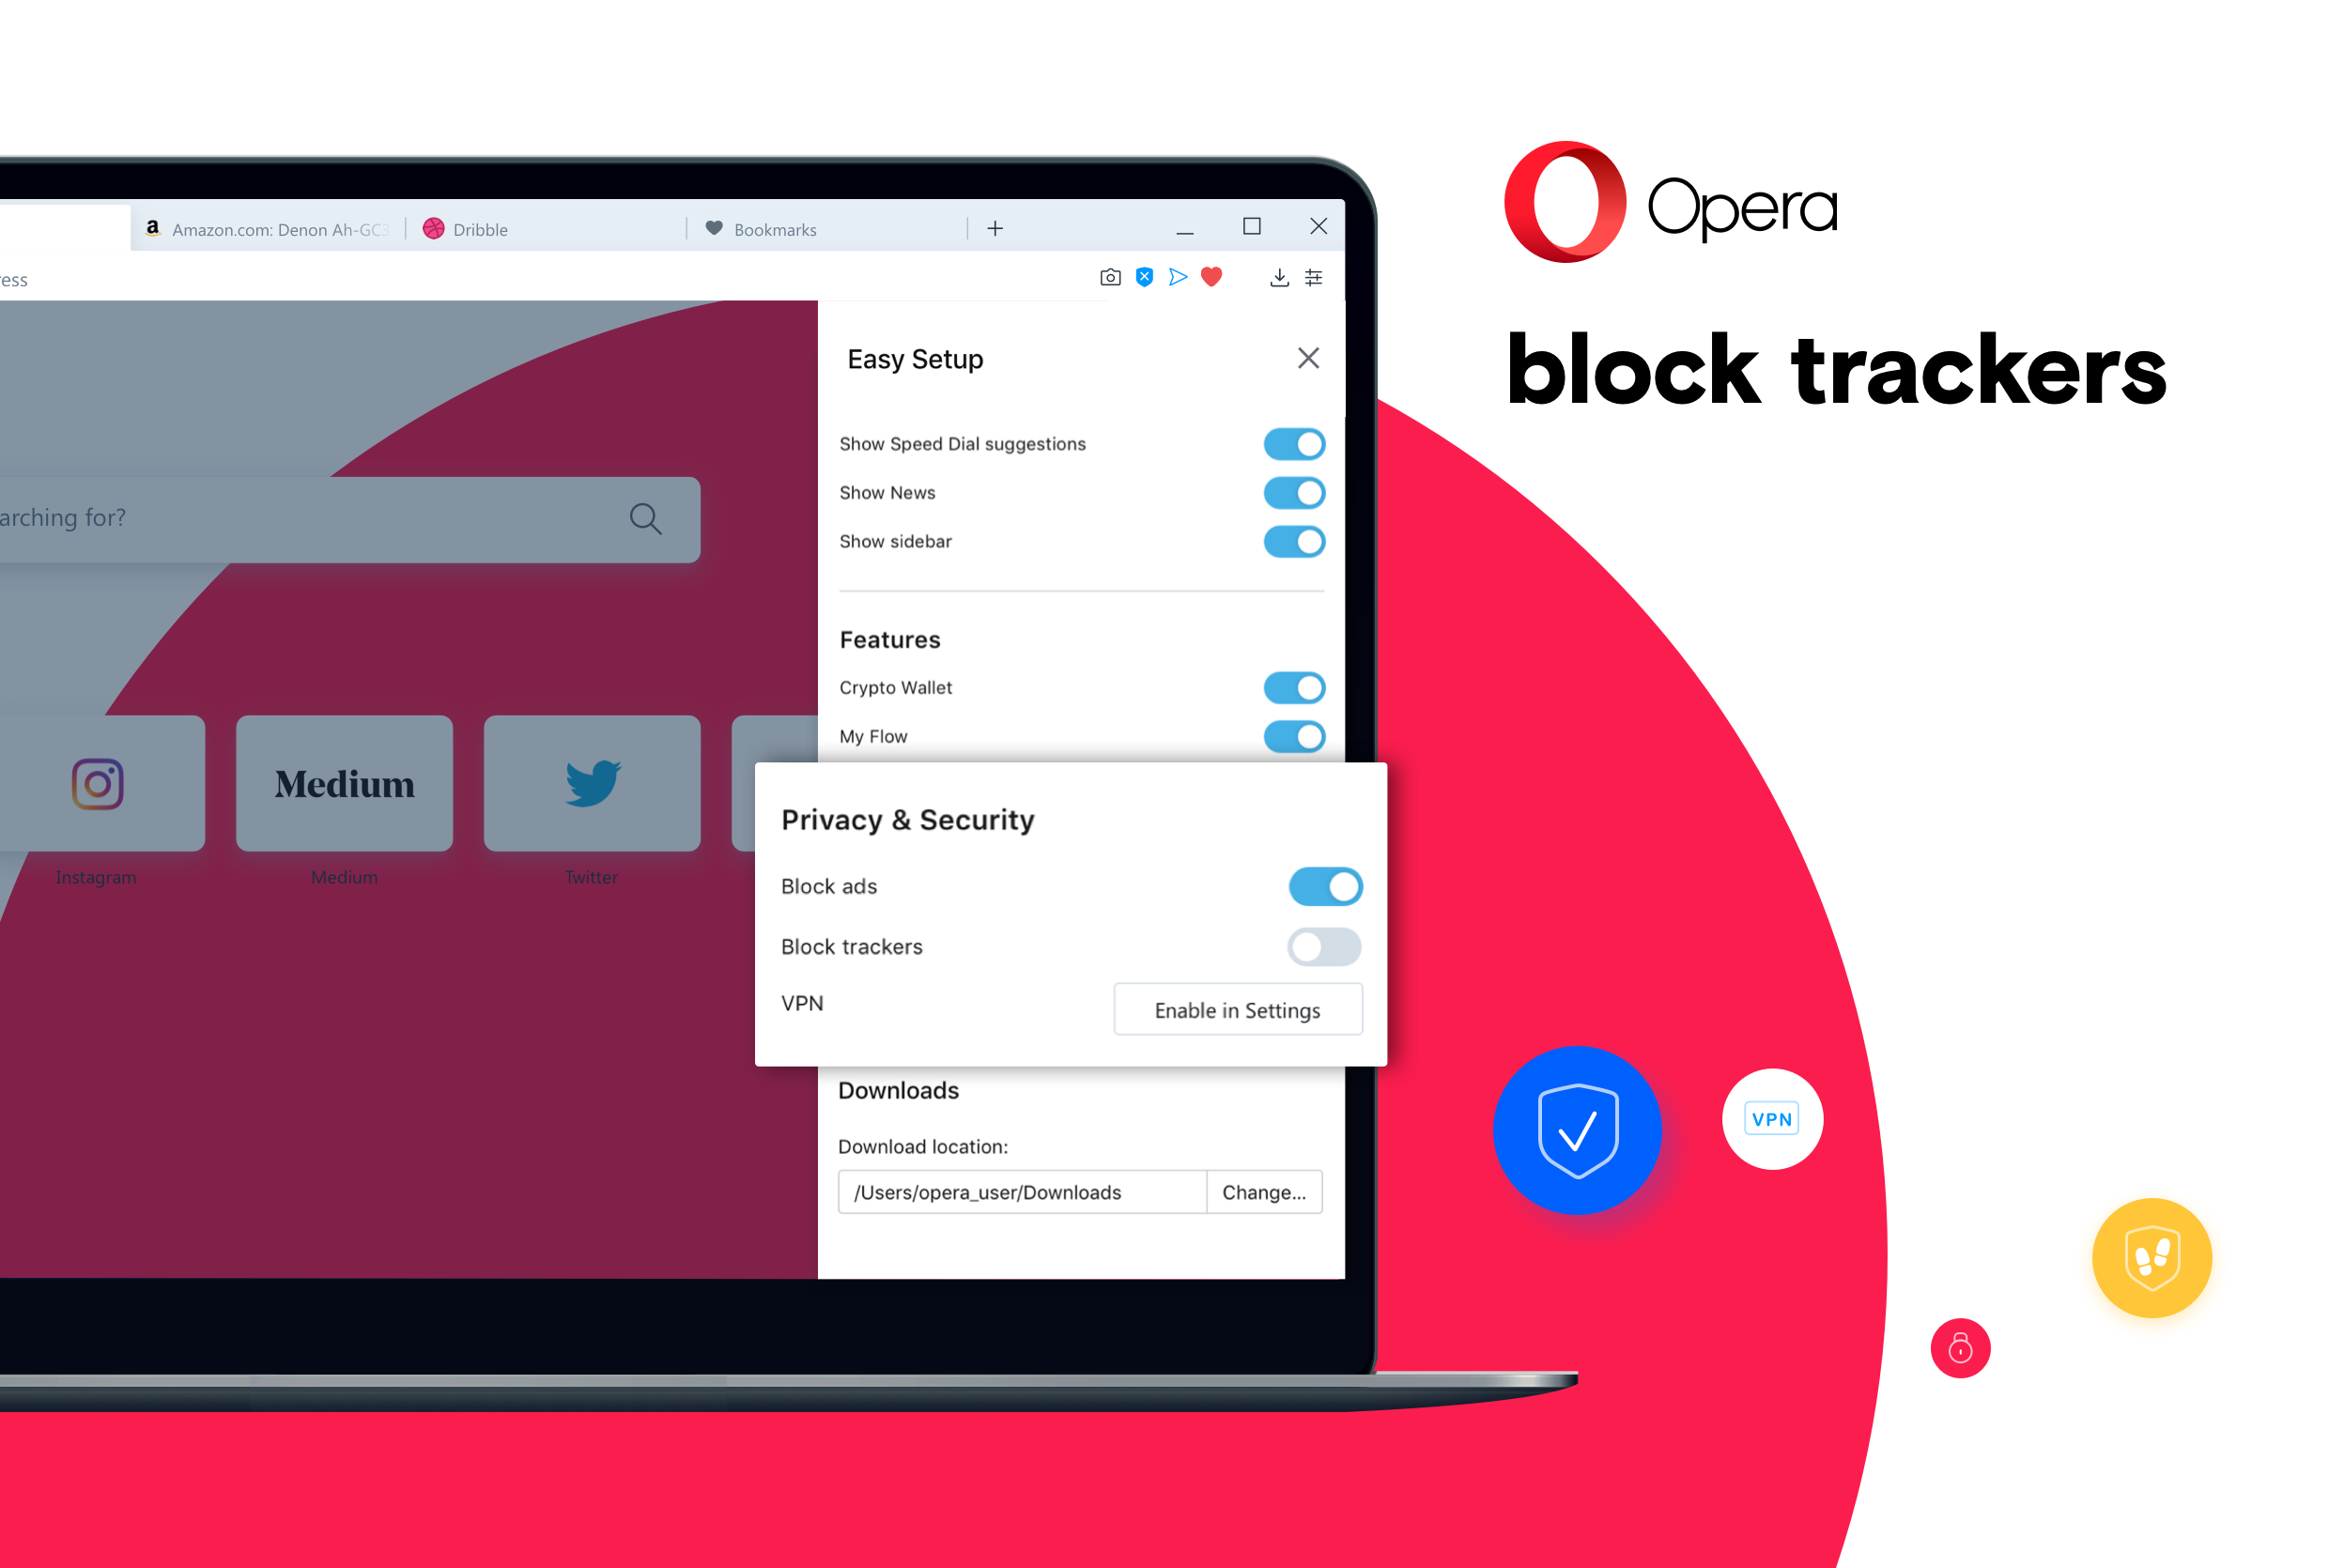 Opera Browser now lets you block trackers for increased privacy